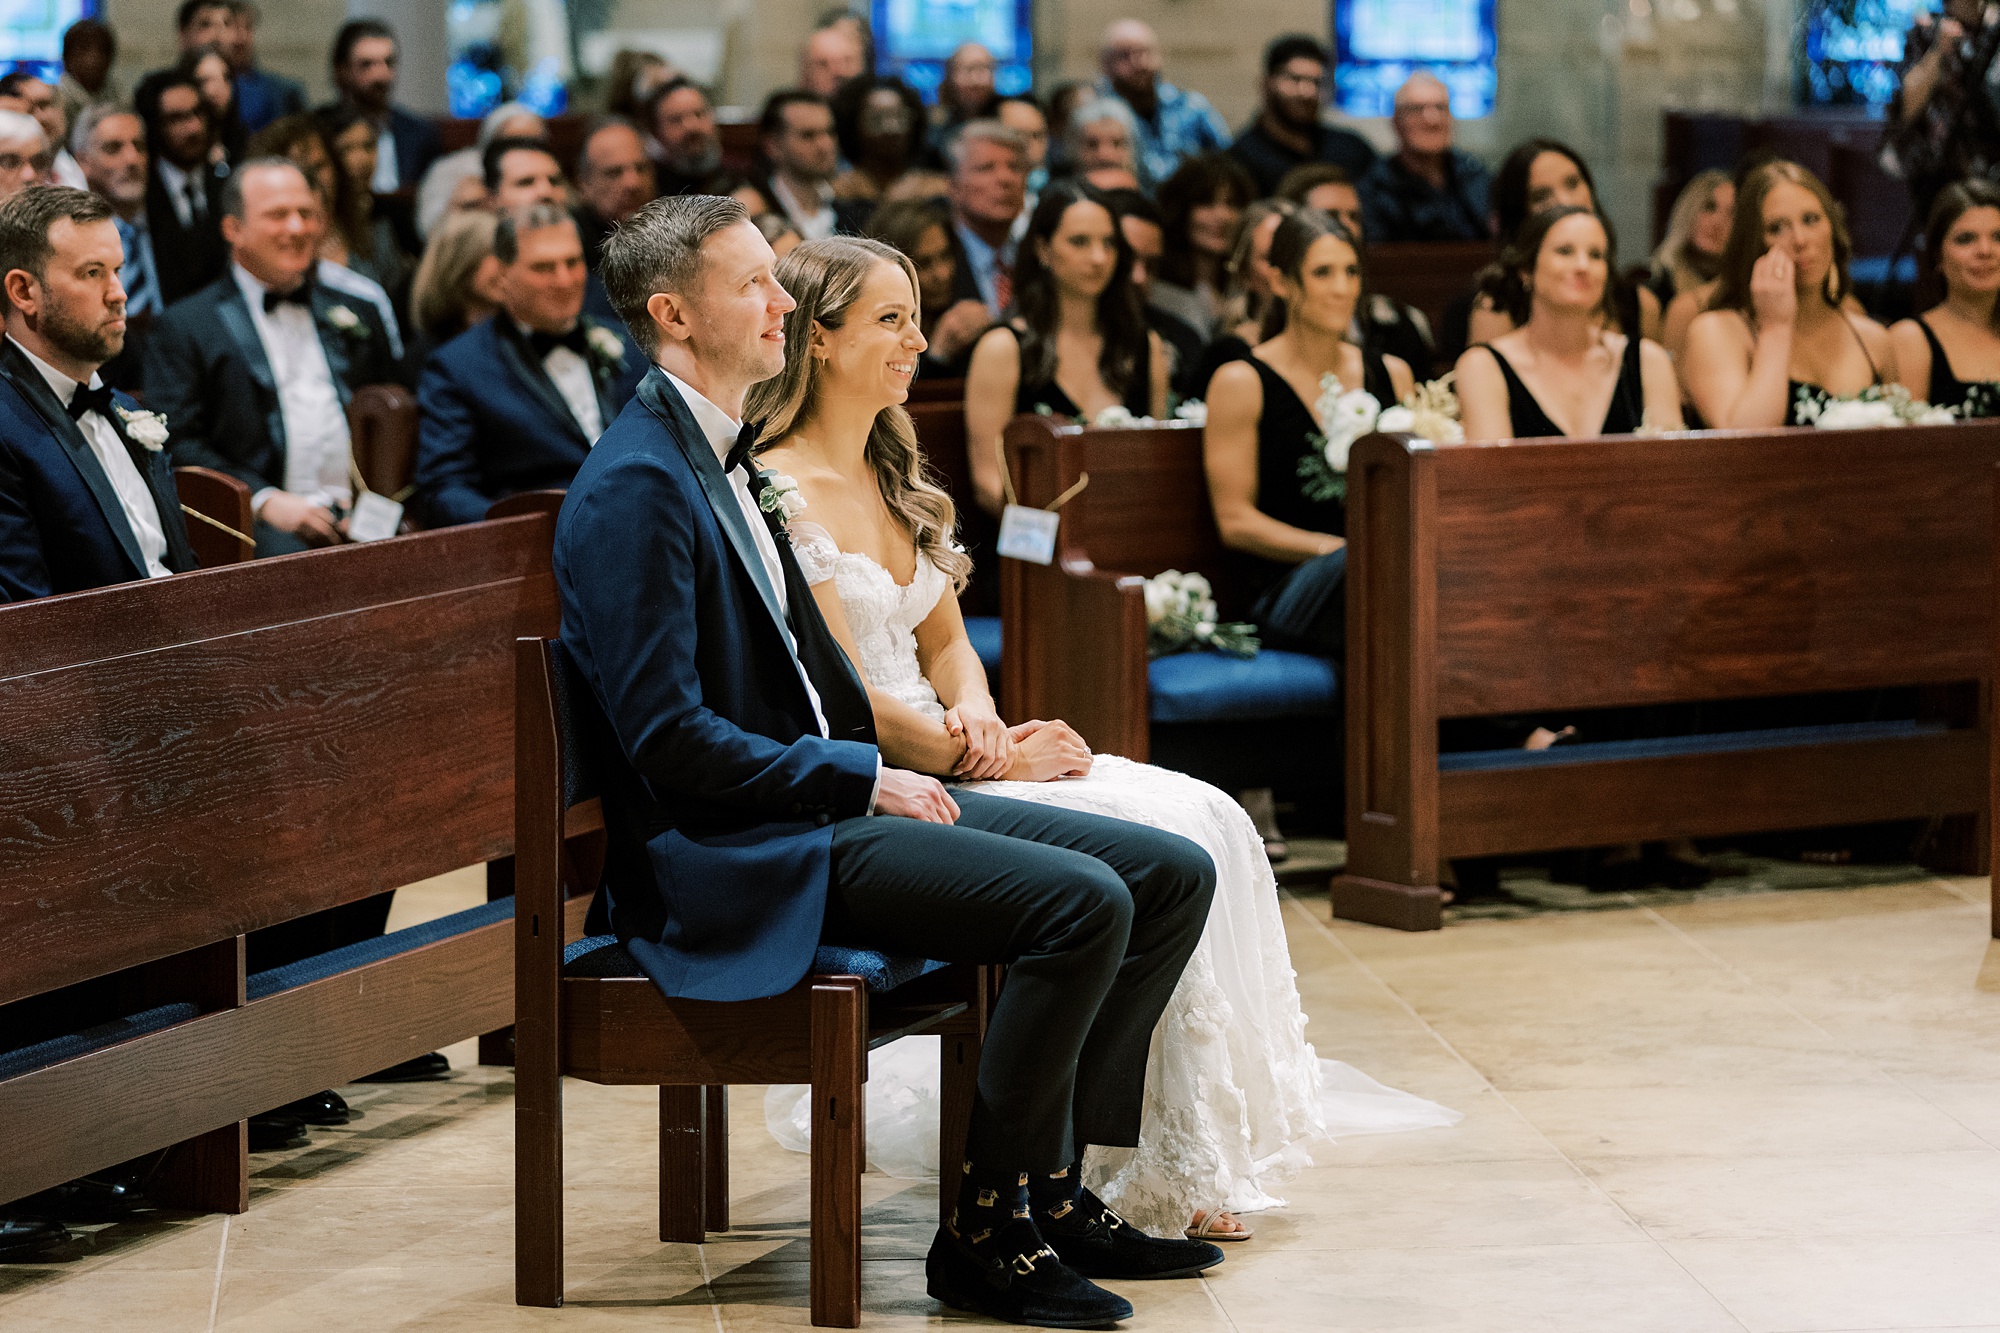 newlyweds sit together during wedding ceremony at St. Helen's Church in Westfield NJ